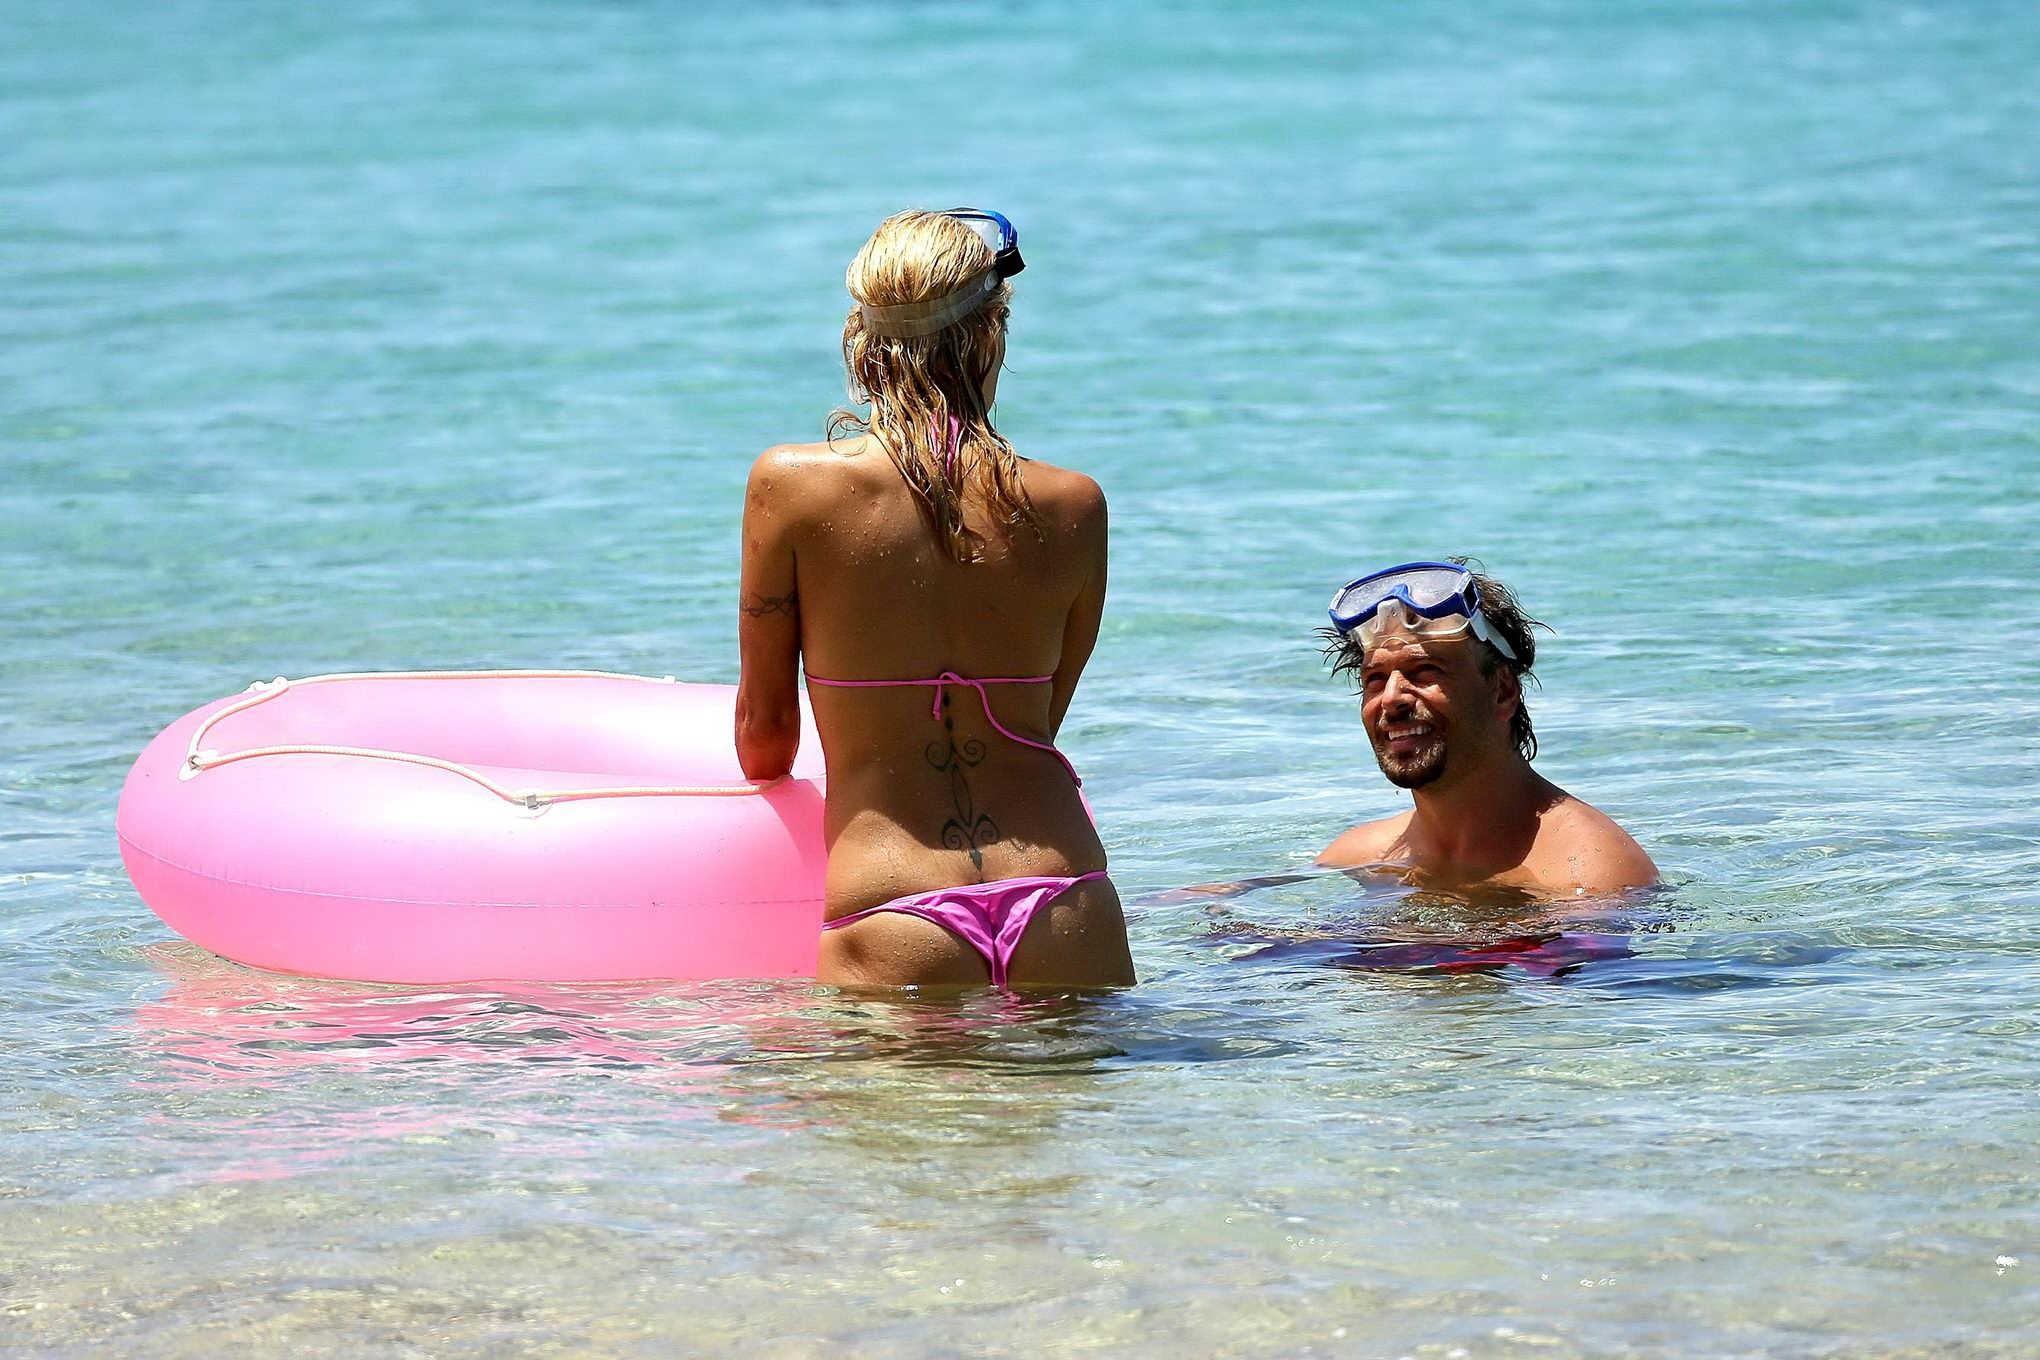 Busty Pamela Anderson showing pokies in a wet pink bikini while snorkeling on a  #75221506